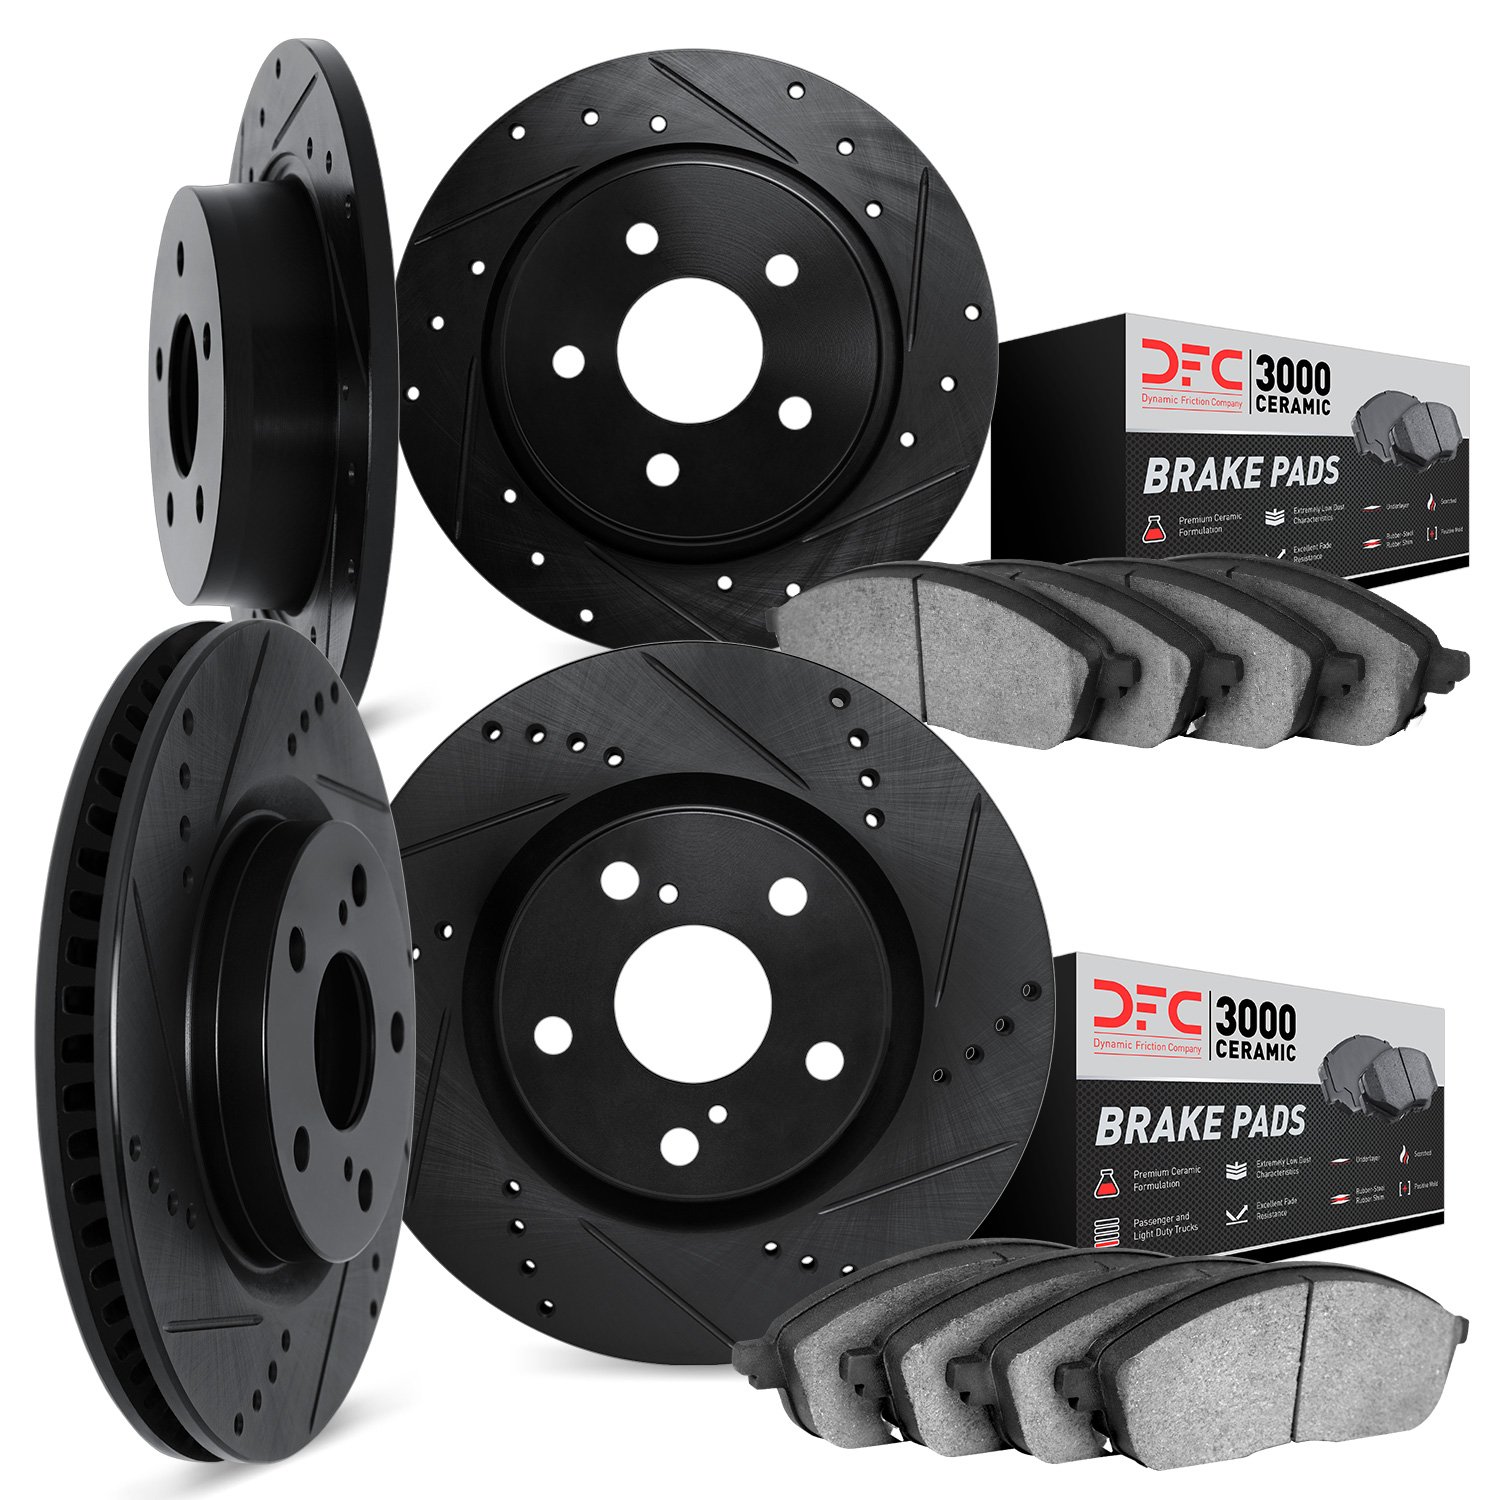 8304-59062 Drilled/Slotted Brake Rotors with 3000-Series Ceramic Brake Pads Kit [Black], 2007-2016 Acura/Honda, Position: Front